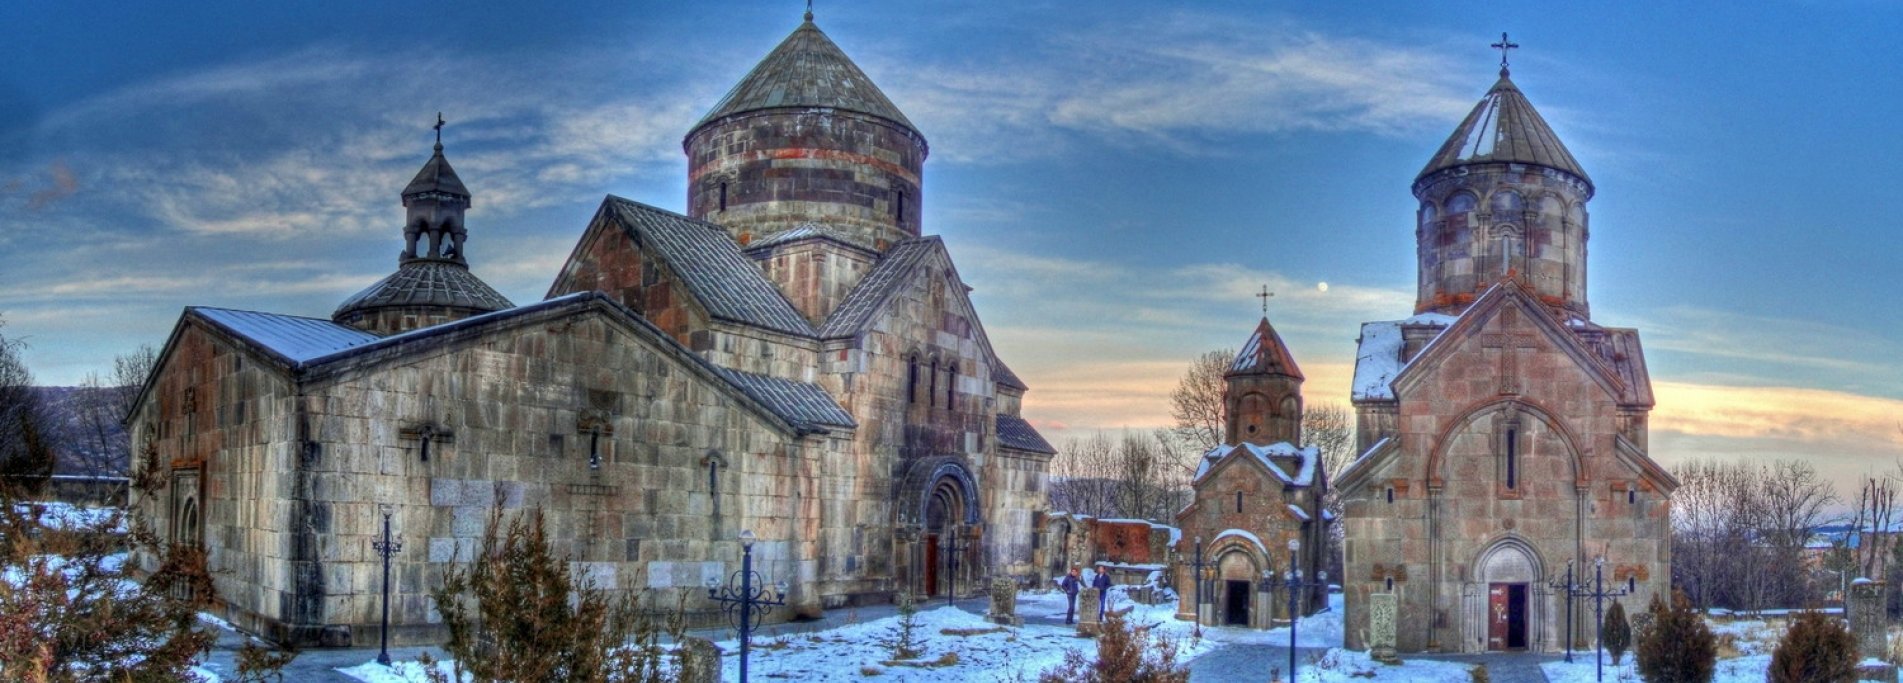 New Year in Armenia - Mountains, sun and magnificent architecture